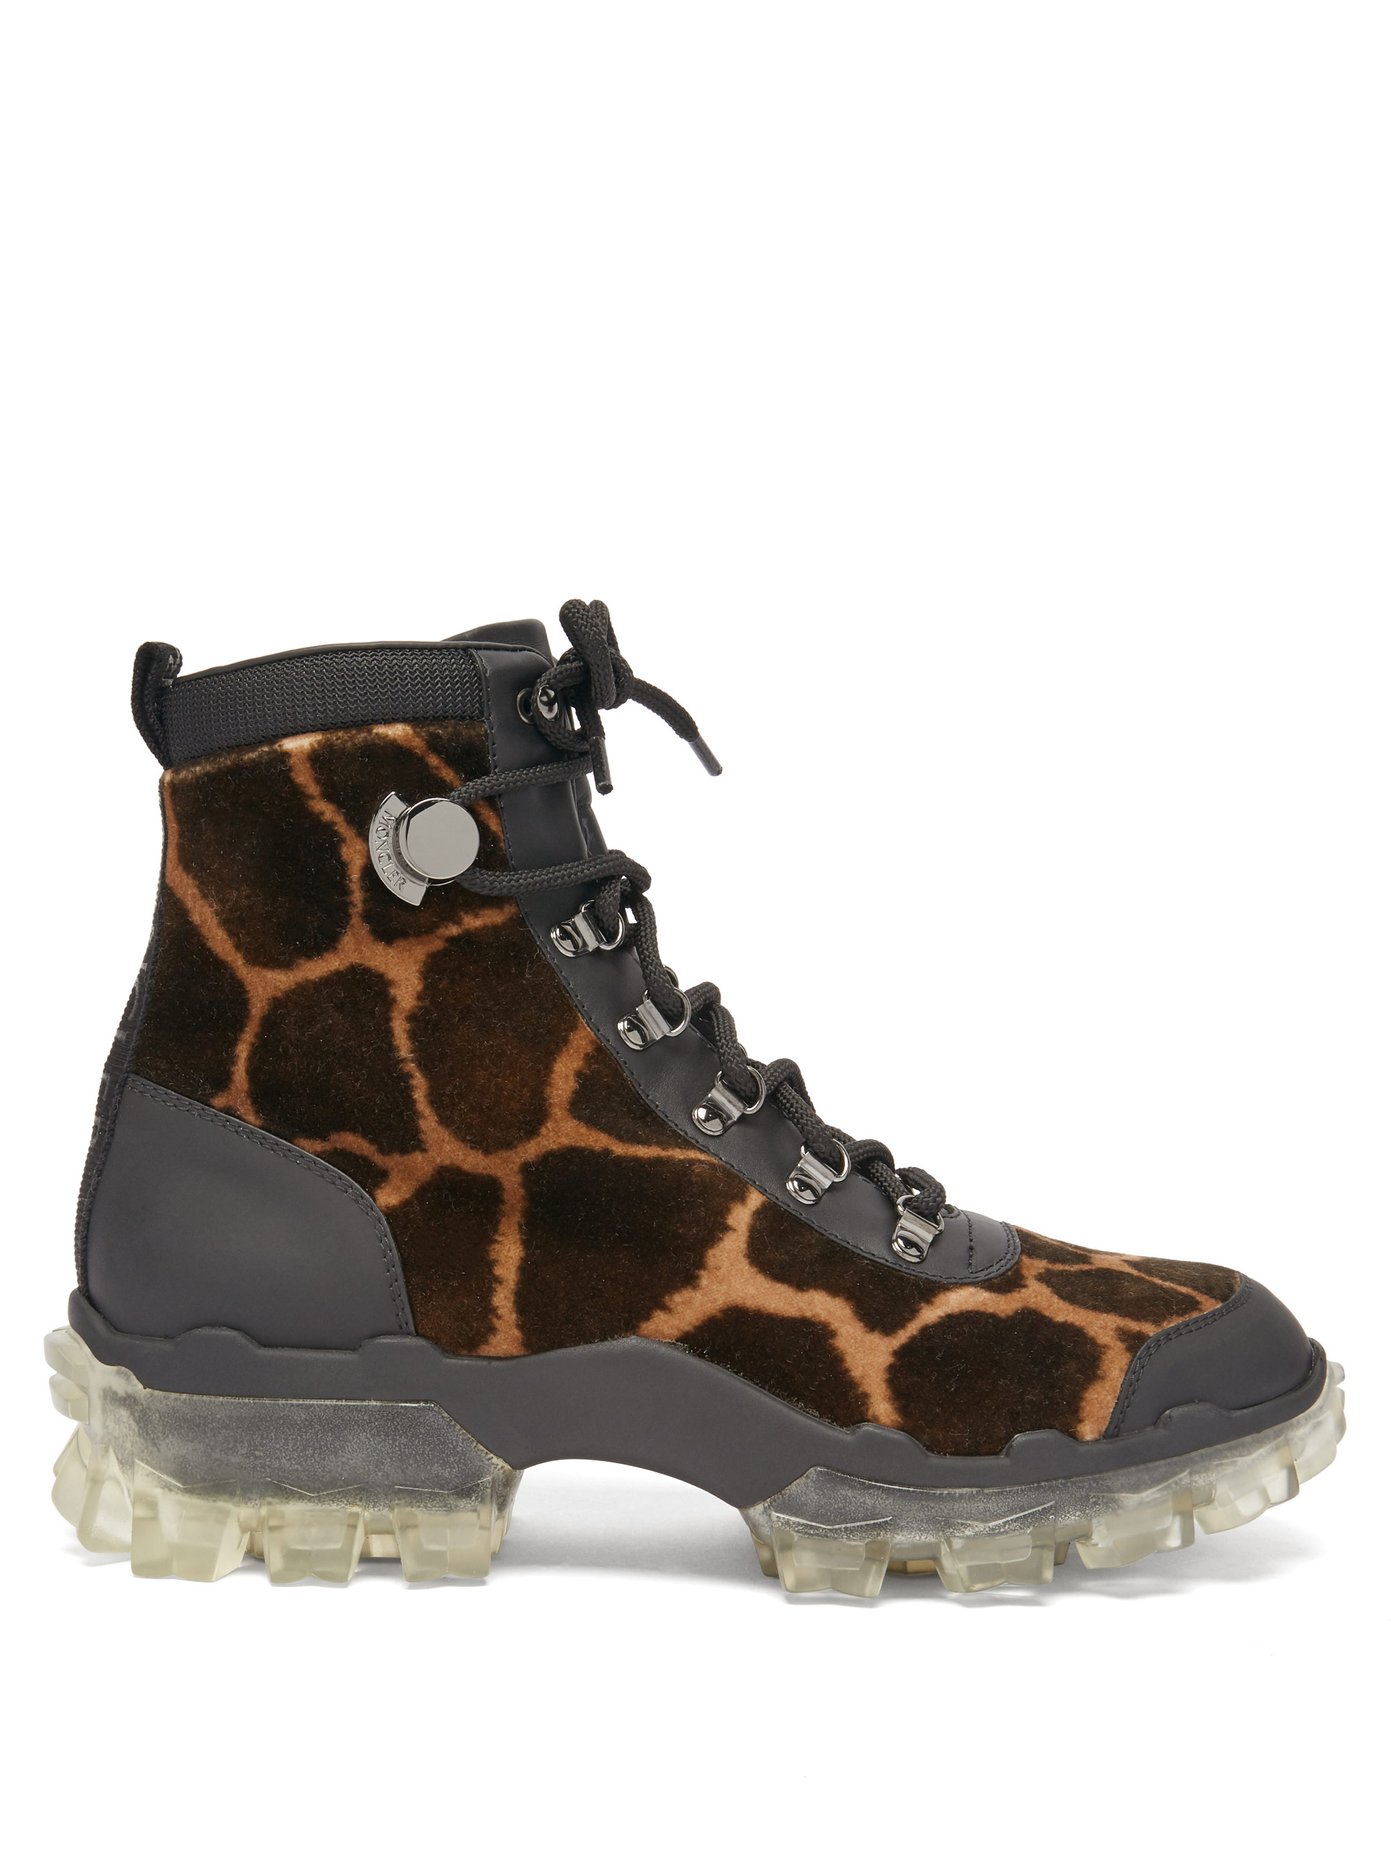 moncler hiking boots